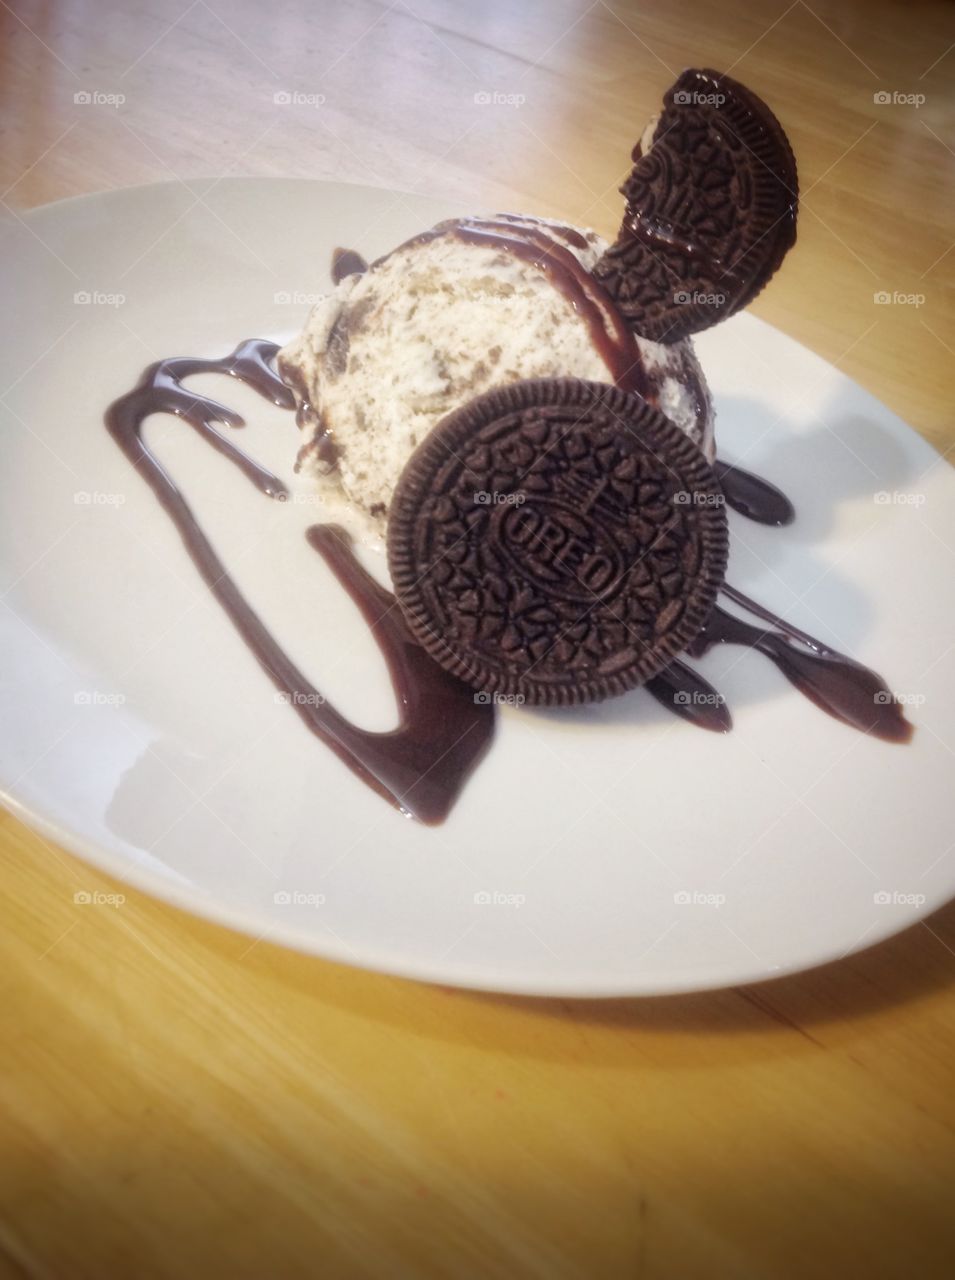 Oreo ice cream topped with Oreo and syrup